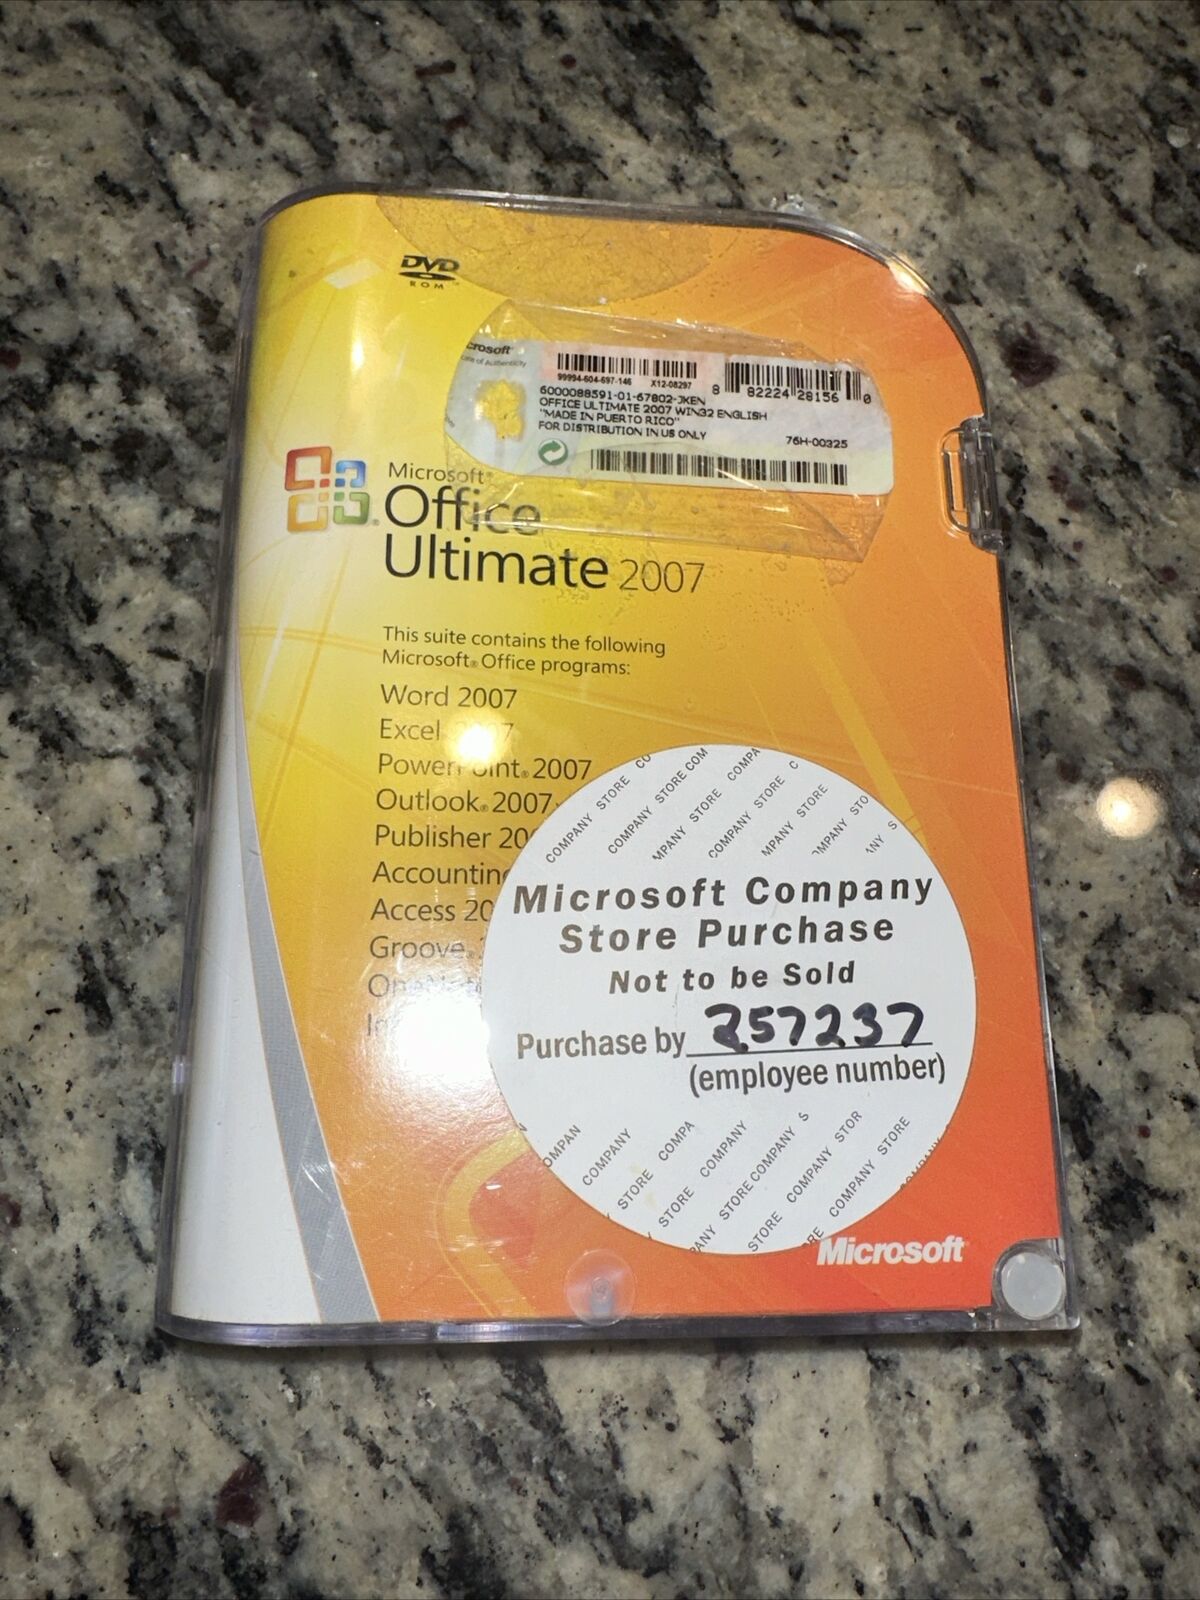 Microsoft Office Ultimate 2007 for Windows with Genuine Product Key